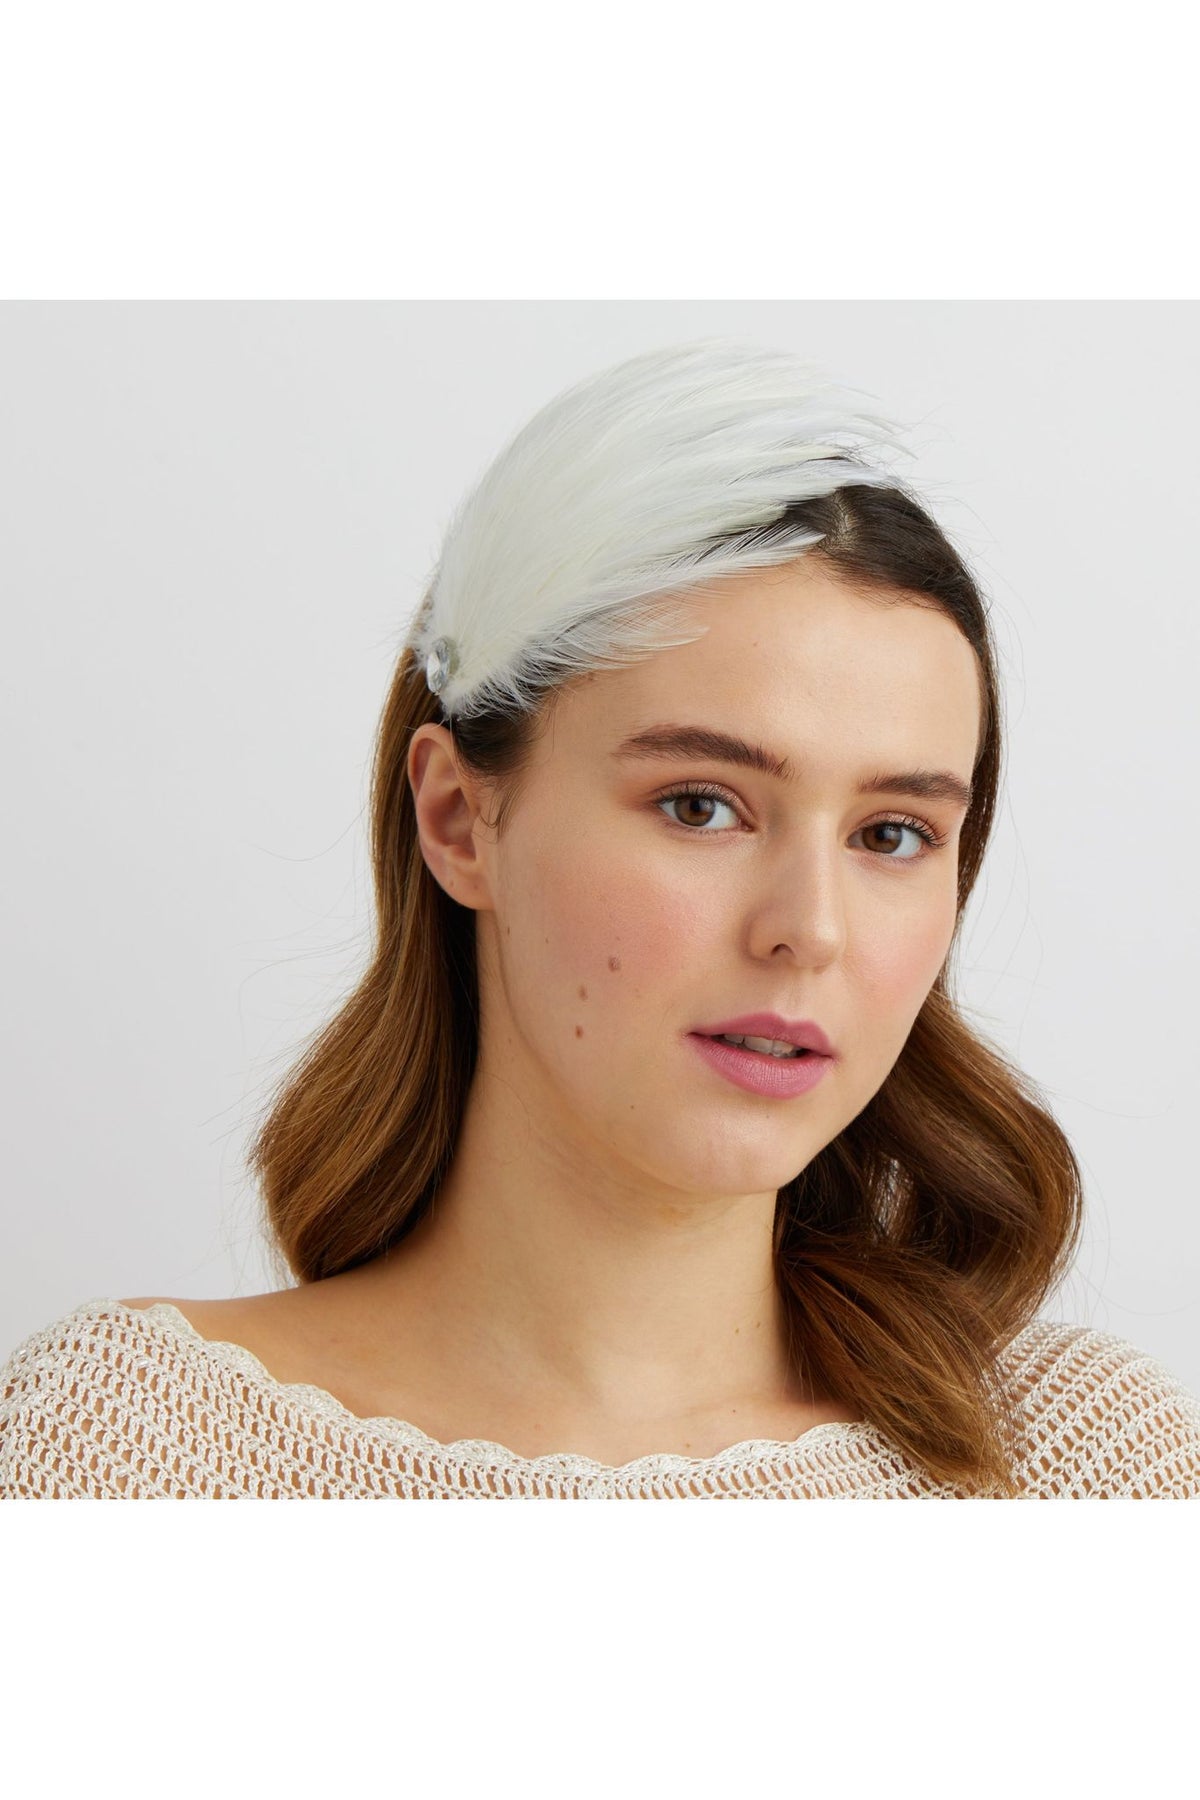 White Fascinator Headband With Feathers 5060801171717